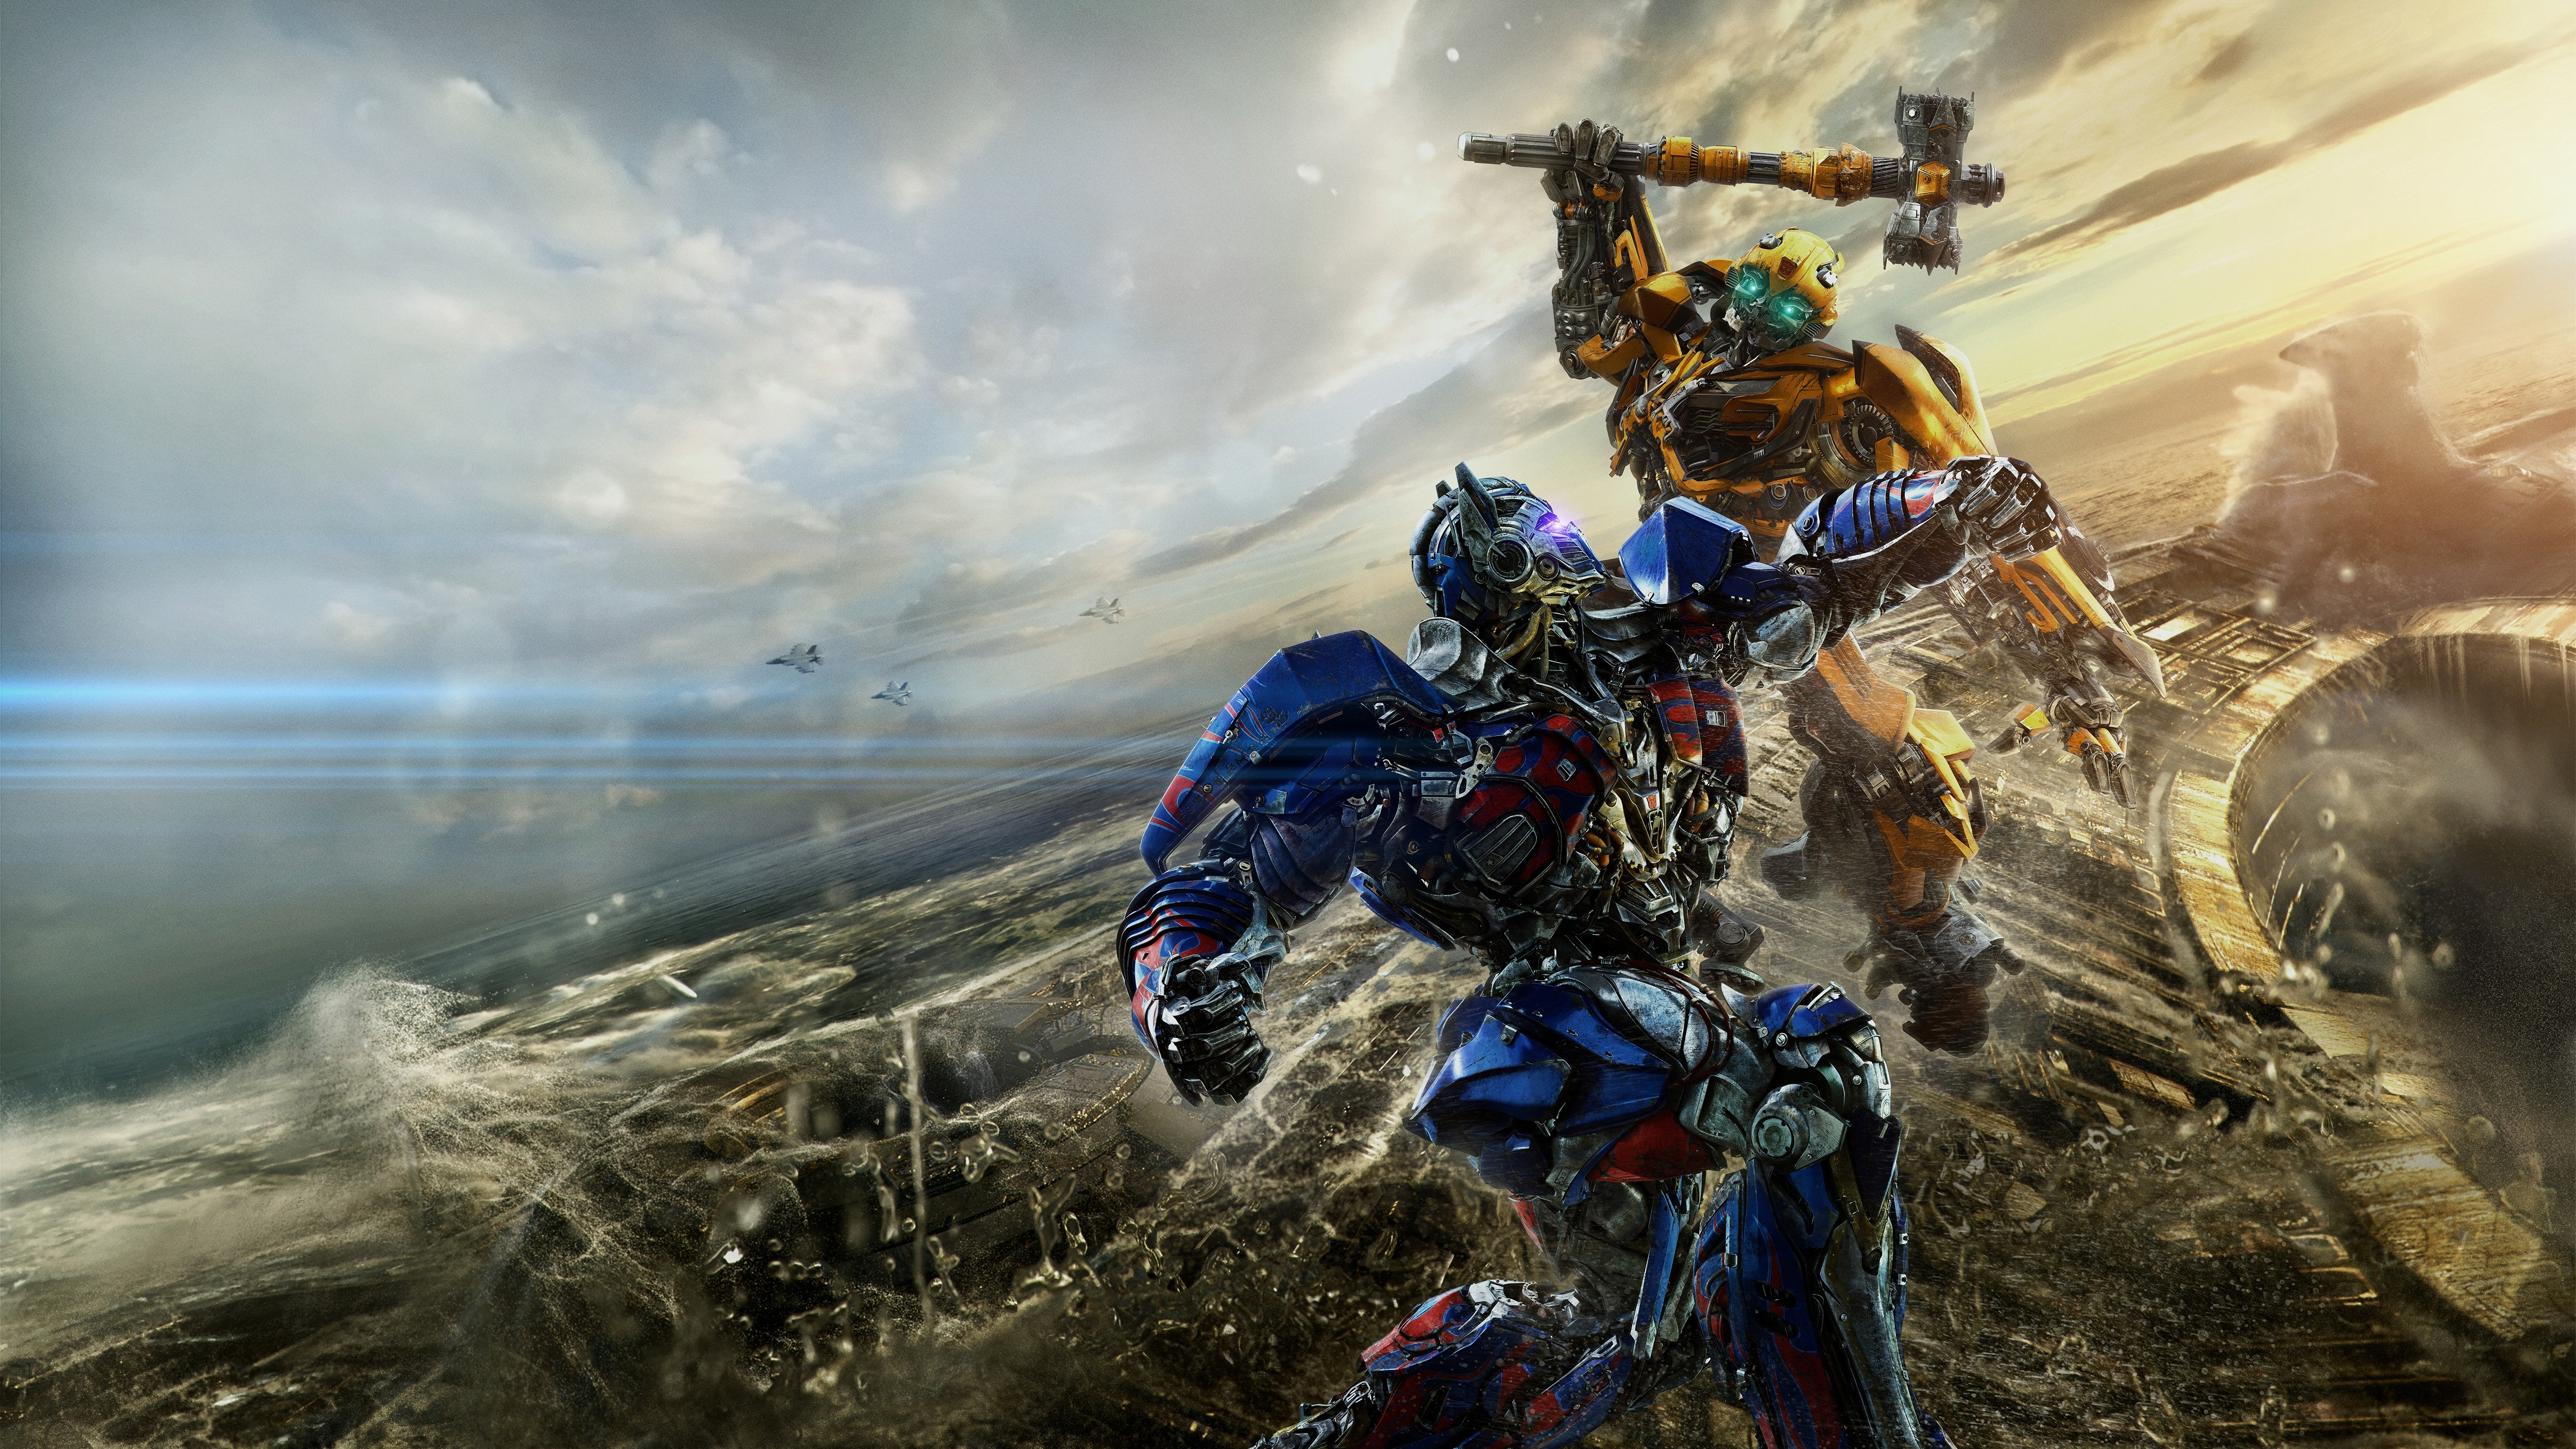 download 27 transformers: the last knight wallpapers